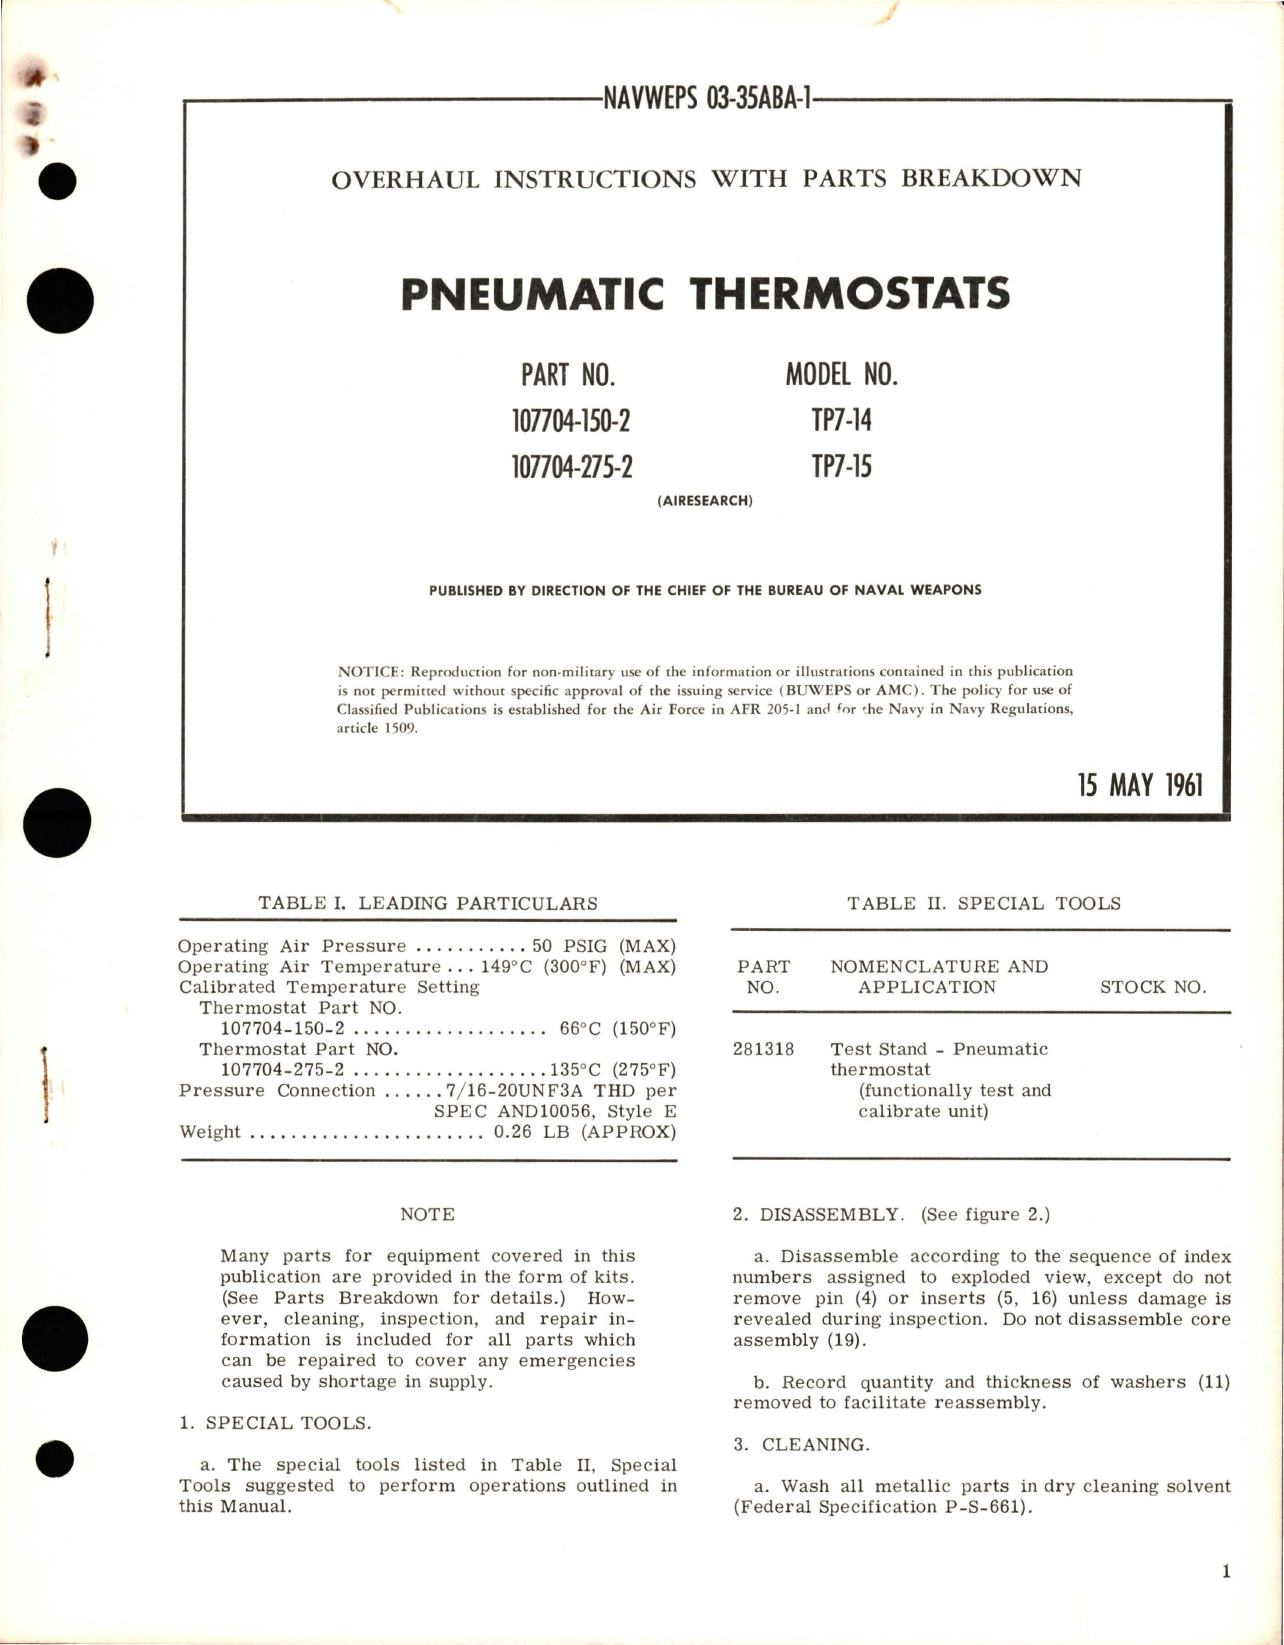 Sample page 1 from AirCorps Library document: Overhaul Instructions with Parts Breakdown for Pneumatic Thermostats - Parts 107704-150-2 and 107704-275-2